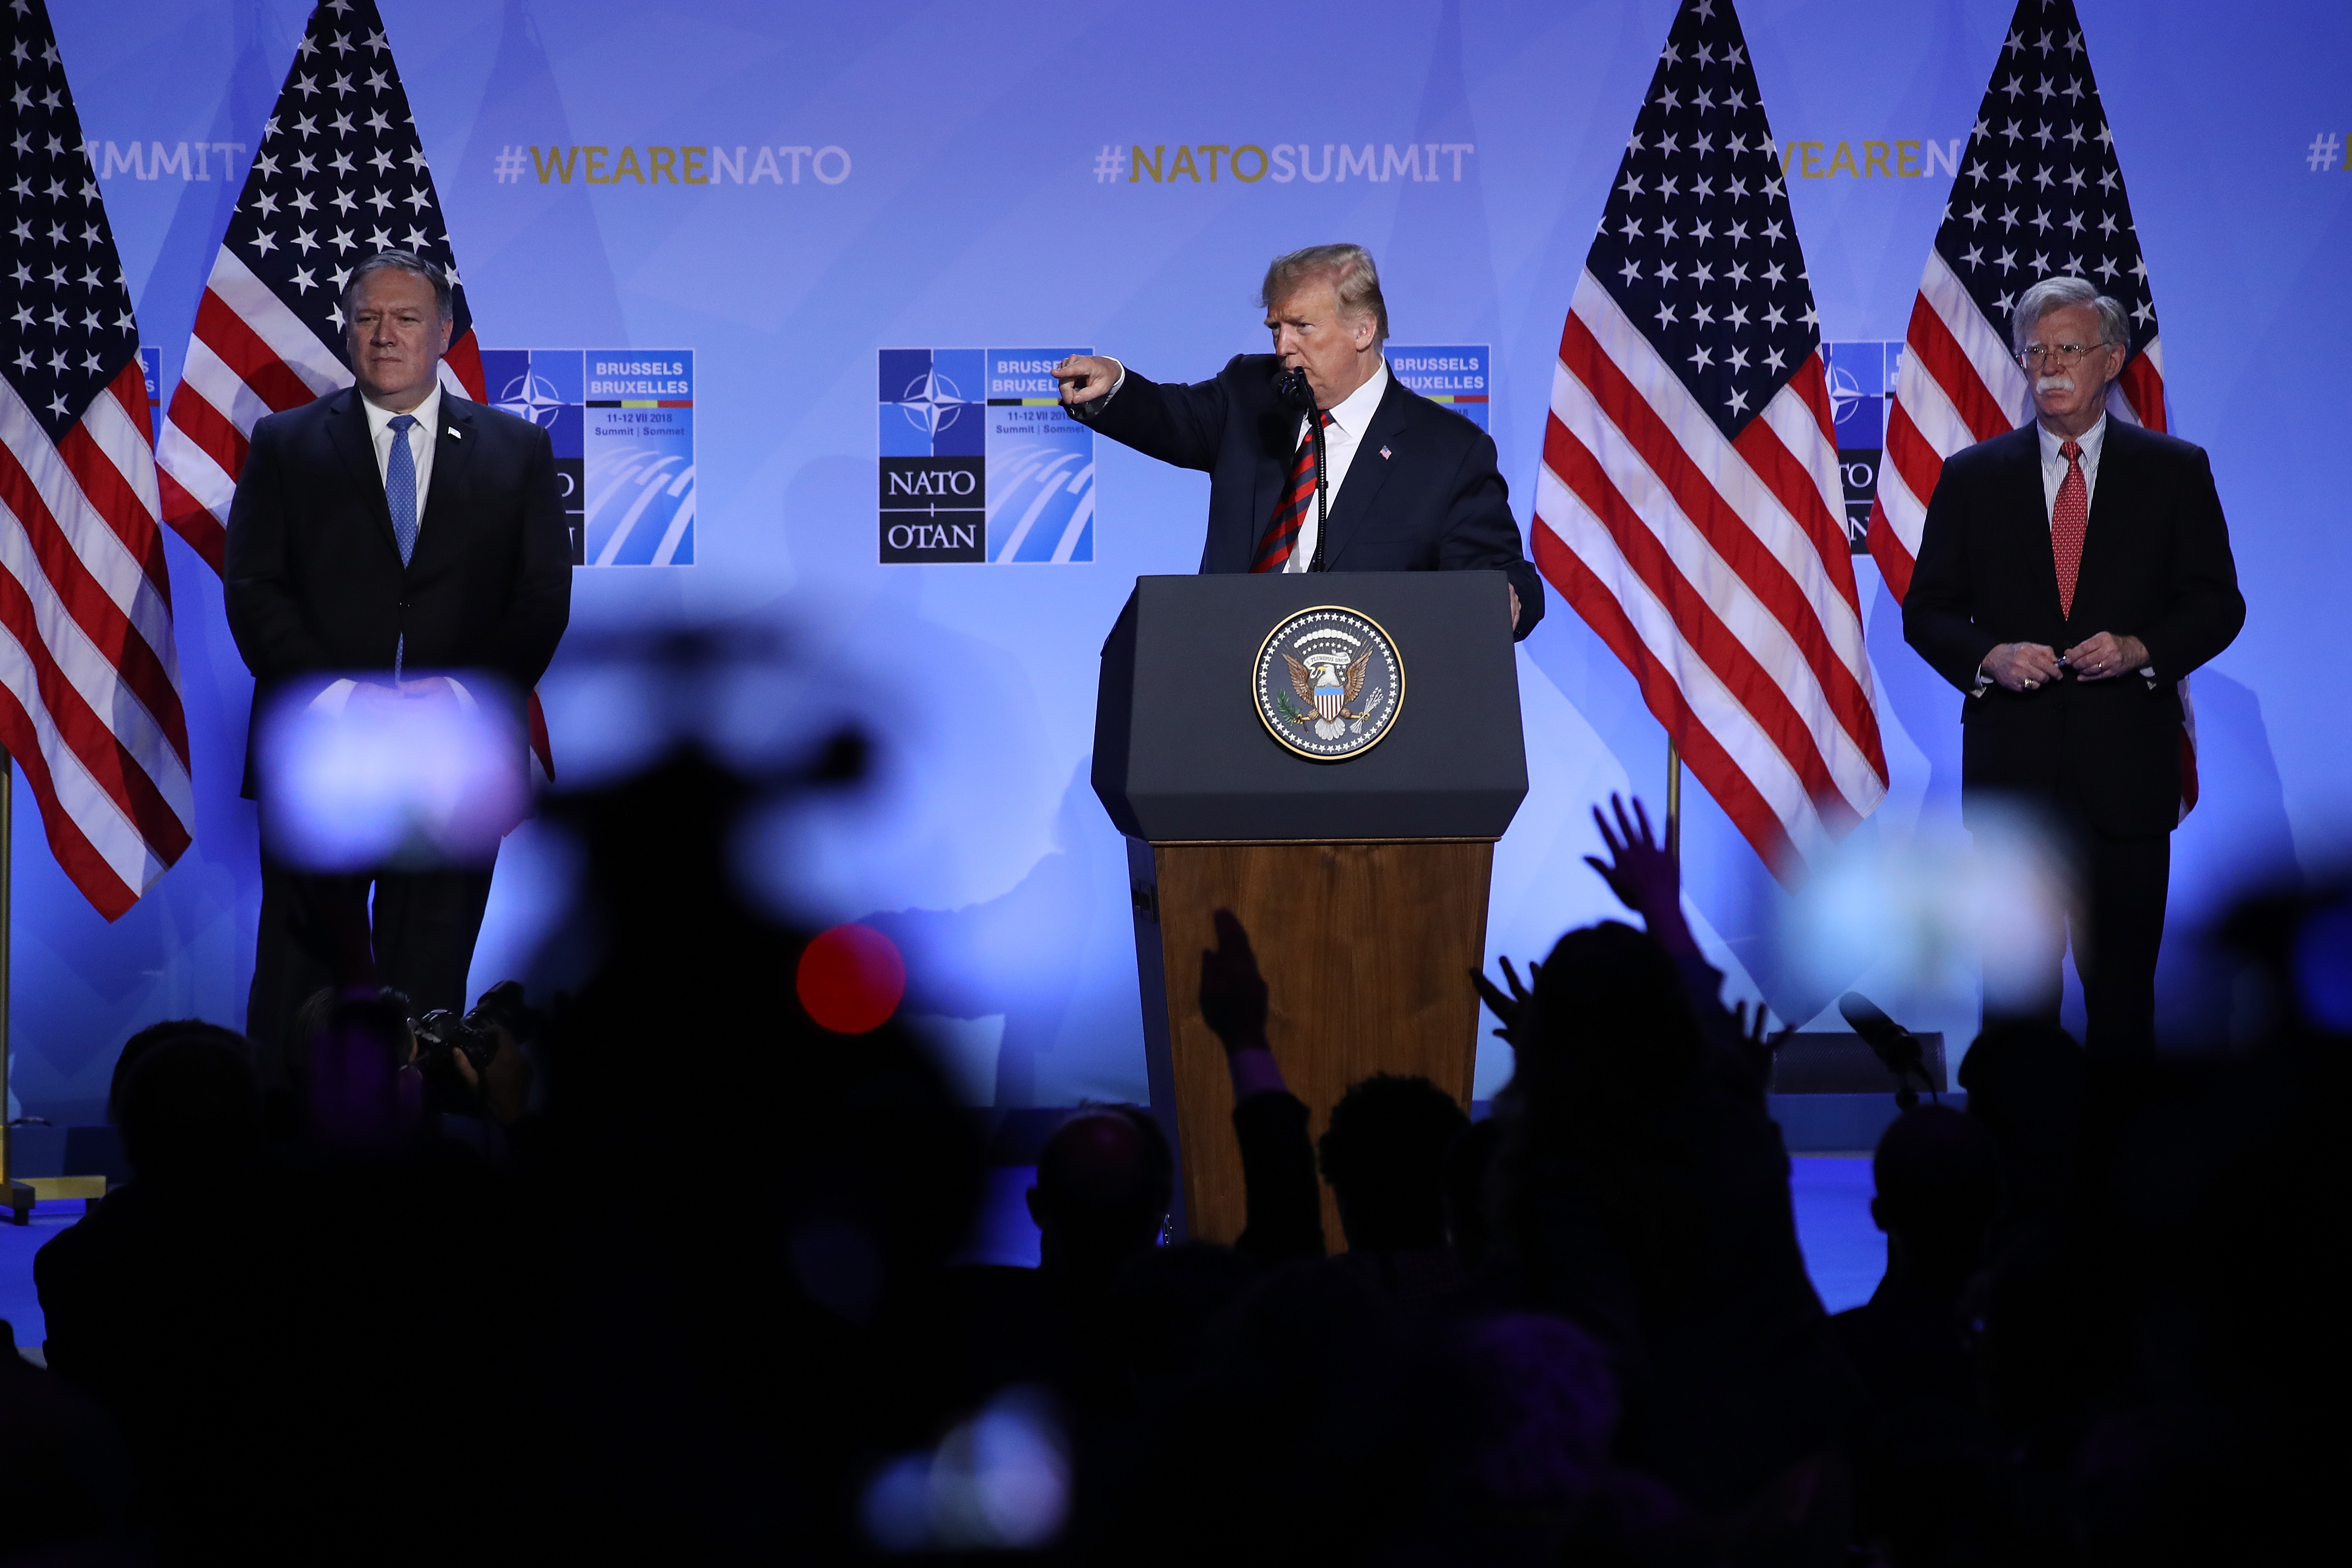 Trump speaks to the media at a press conference at the 2018 NATO Summit in July. By CNN's count, that was the last solo, formal news conference Trump has held. 